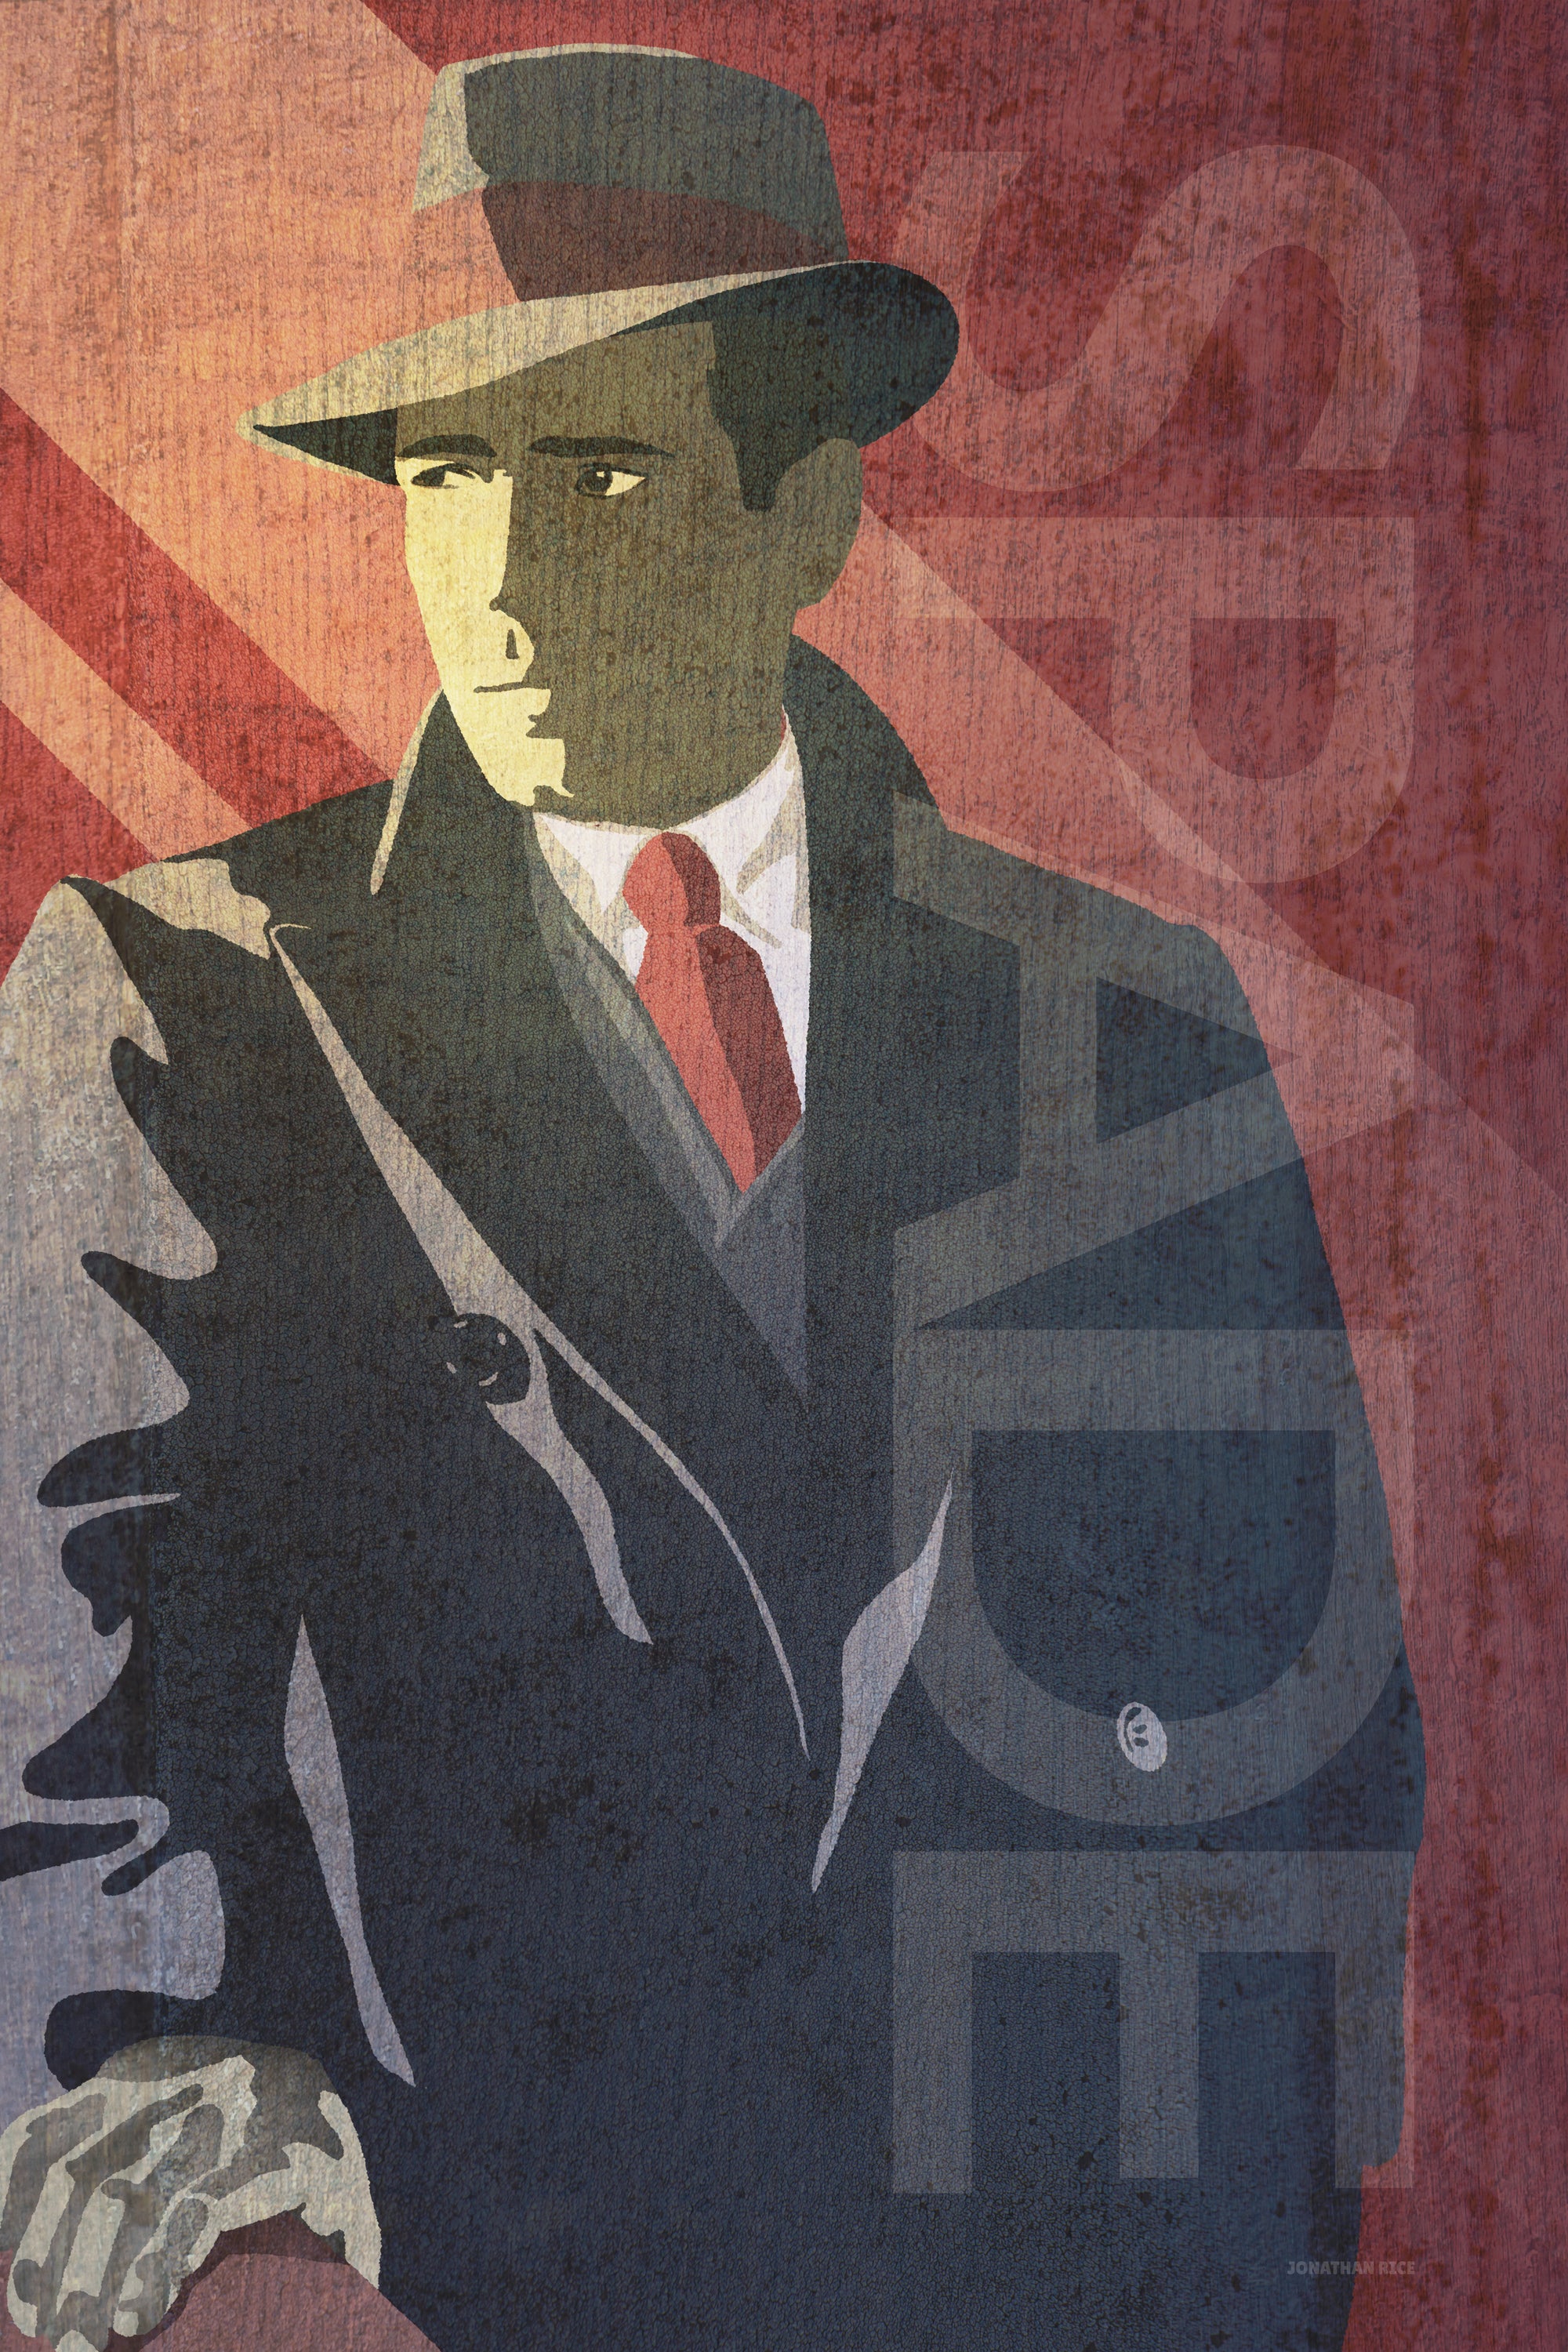 Modern art print of private eye Sam Spade in his signature trench coat and hat.